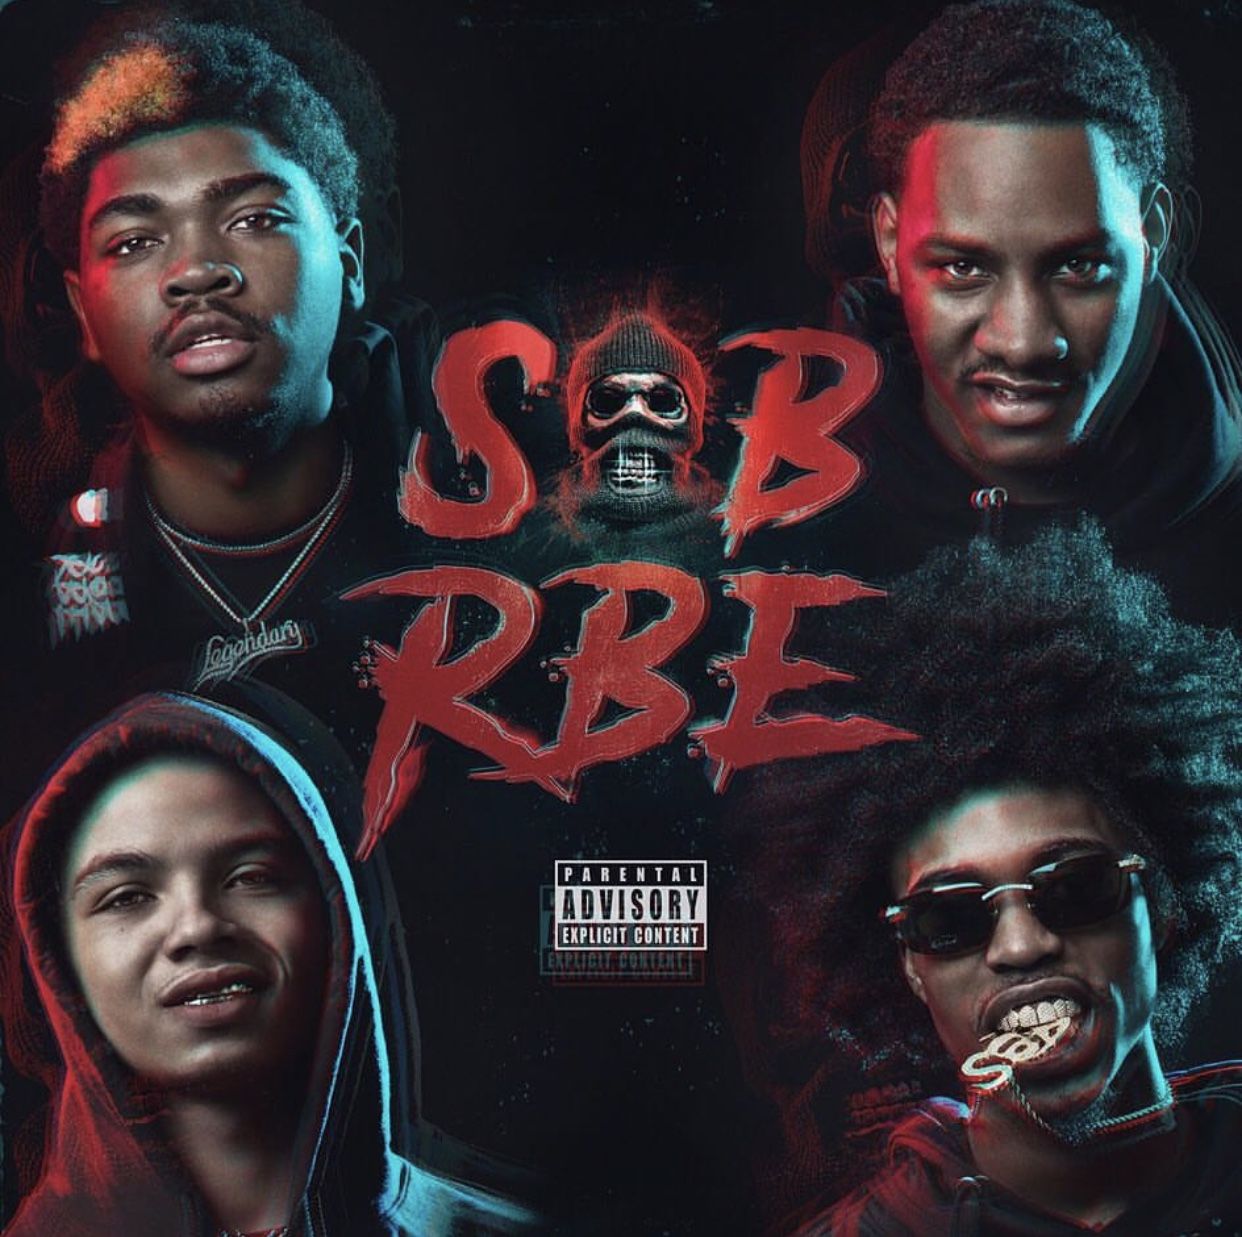 Sob X Rbe Iphone Wallpapers